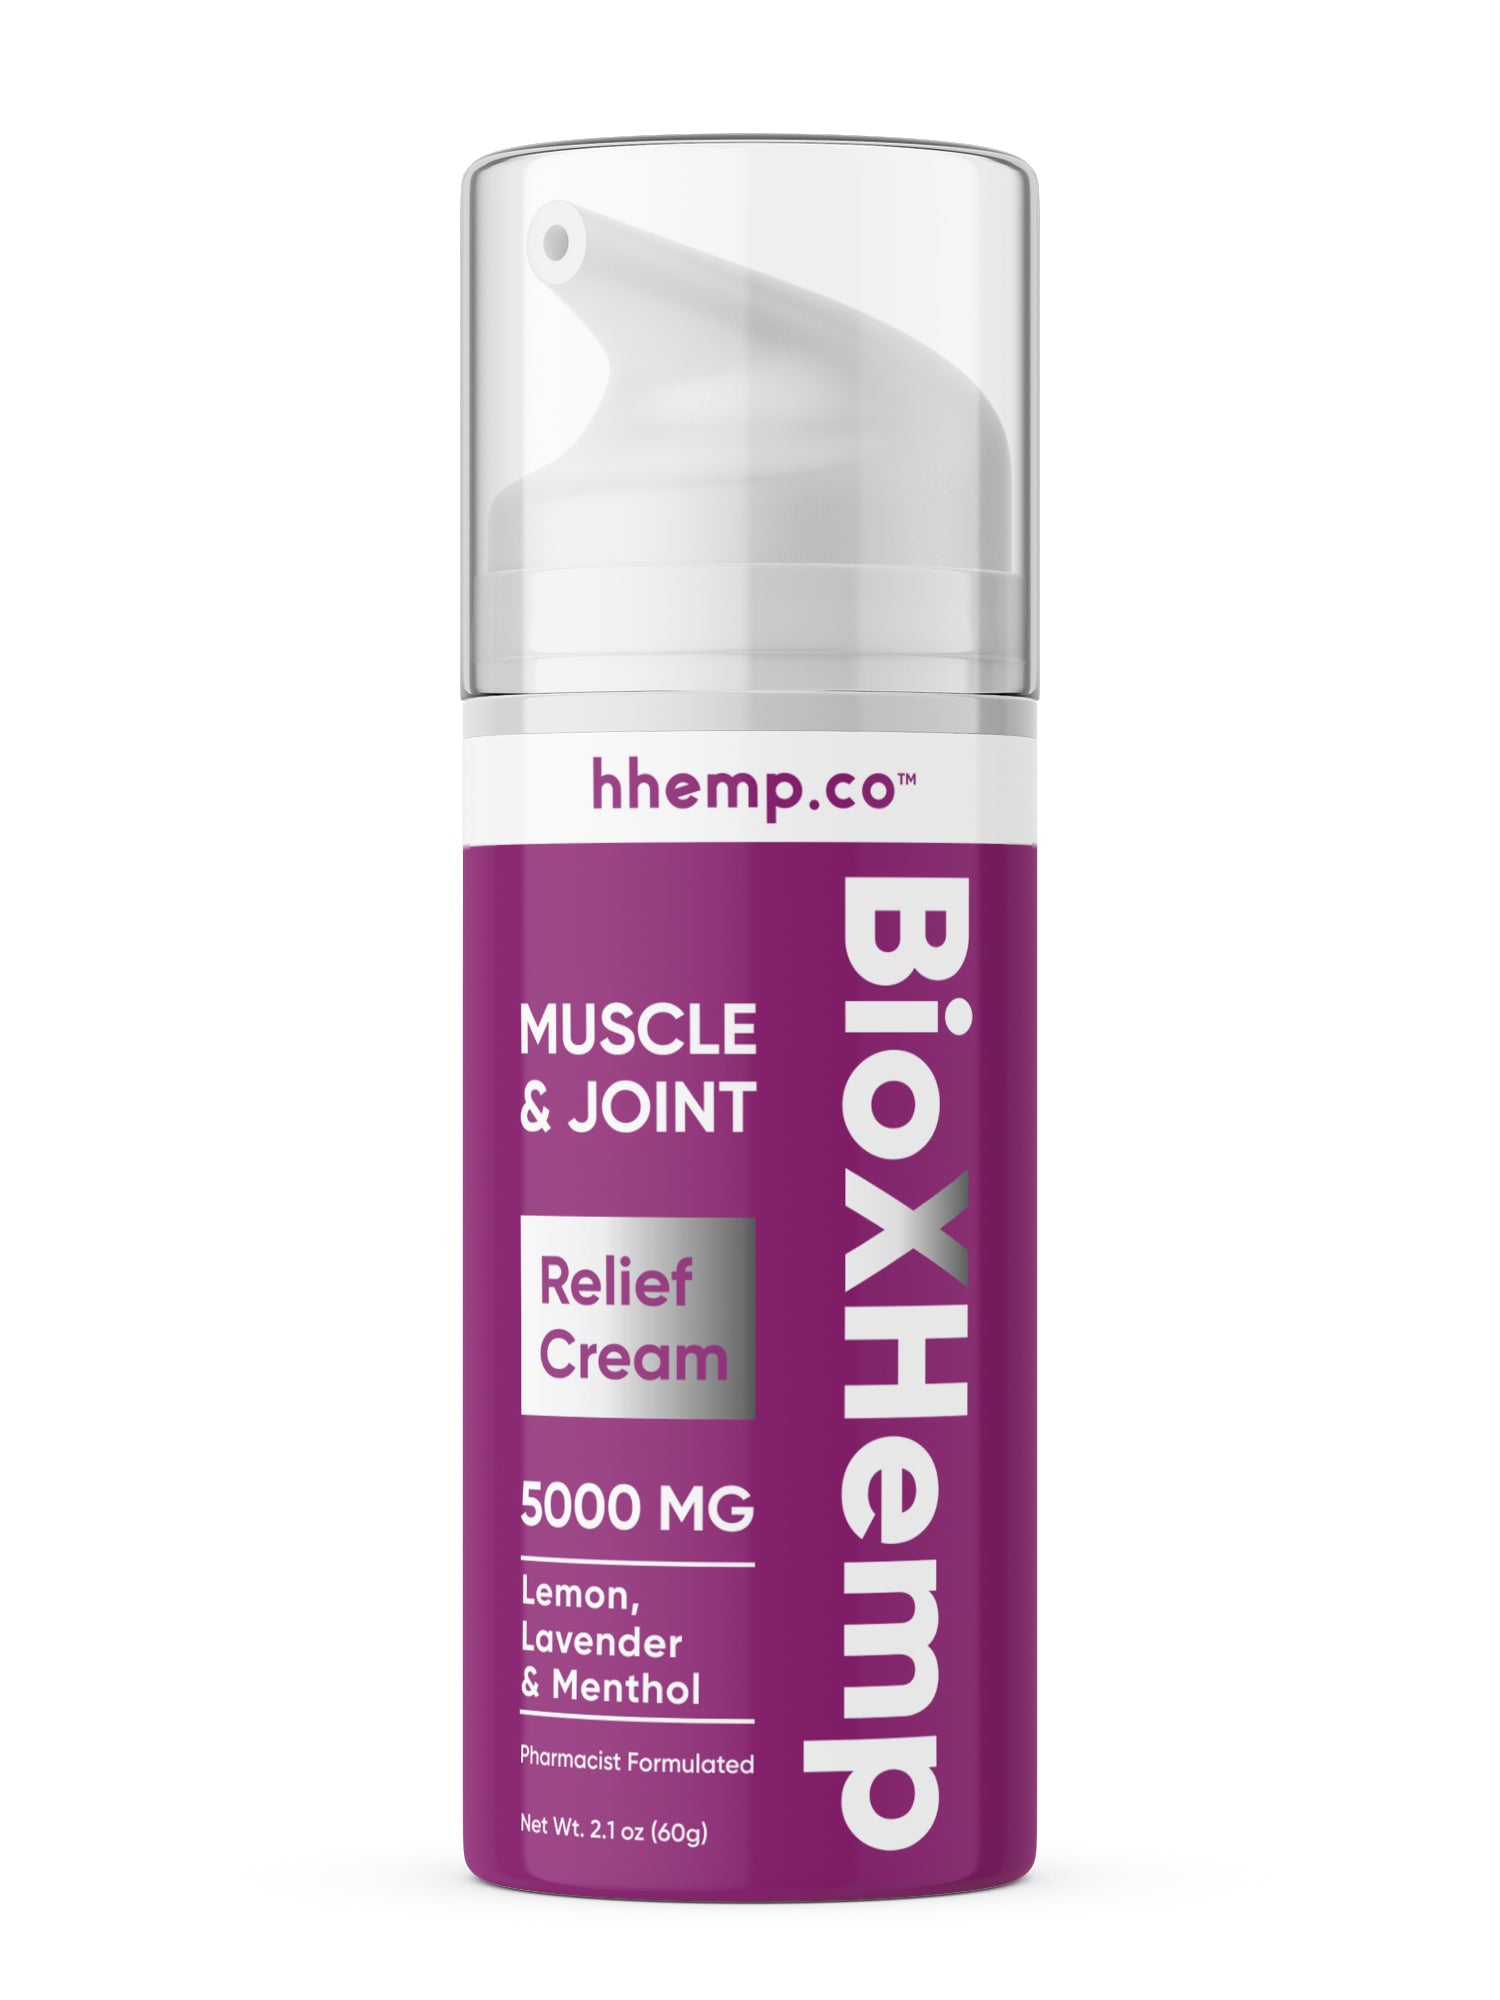 BioXHemp Muscle & Joint Relief Cream - Lemon, Lavender and Menthol (5,000mg)